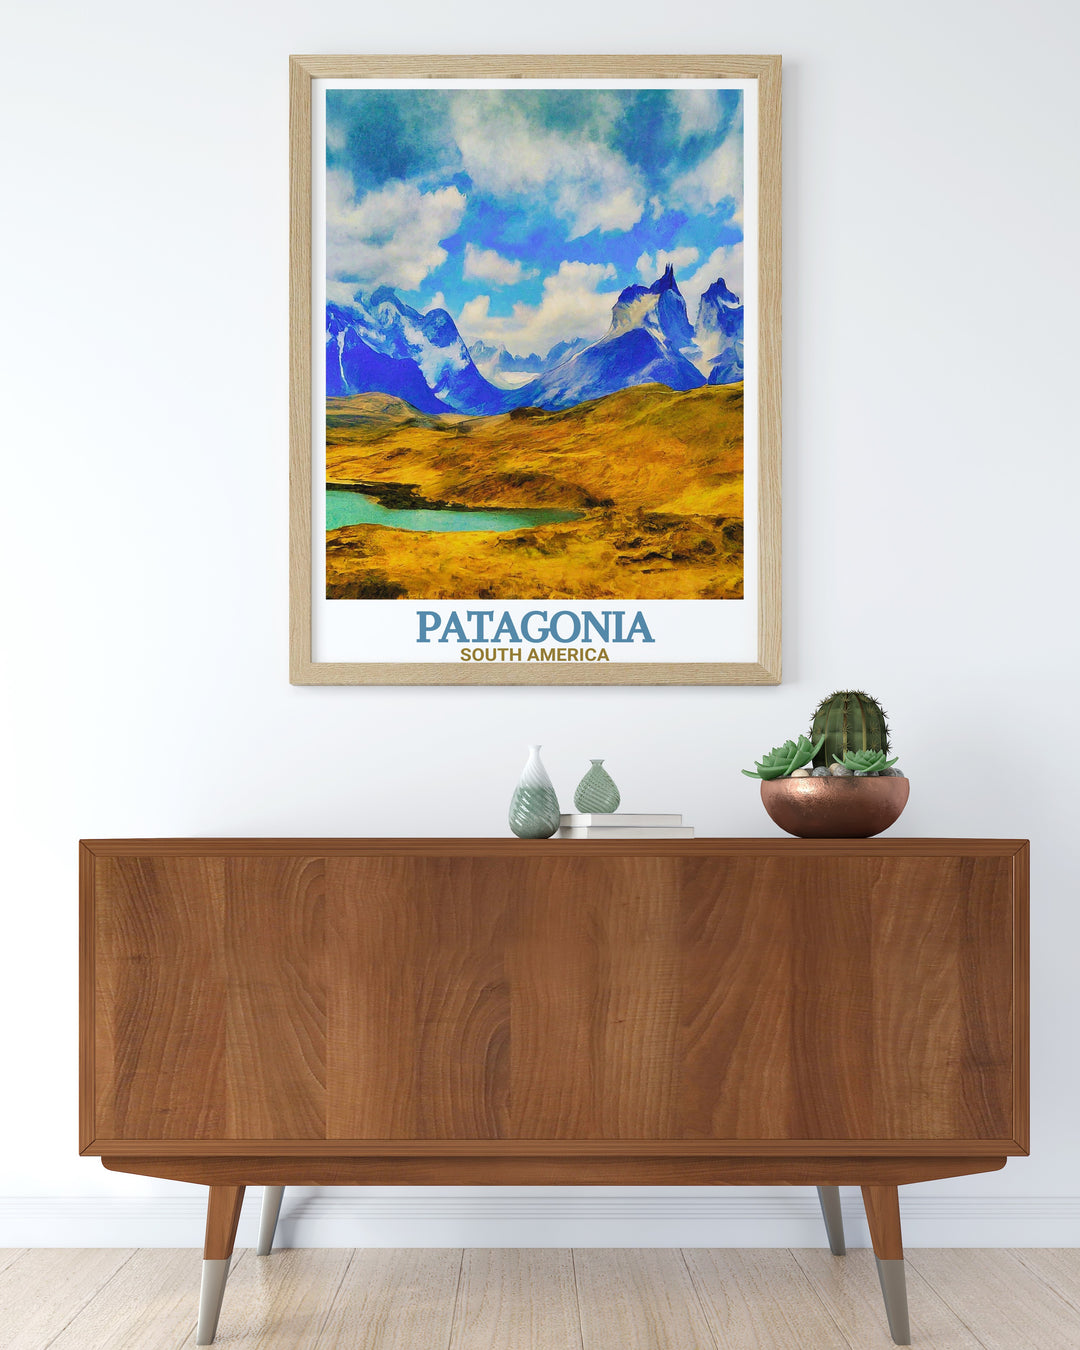 Framed print of Torres del Paine National Park with a view of the Cuernos Del Paine and grazing guanacos. Ideal for home decor and gifts. Adds a touch of elegance and adventure to any room.